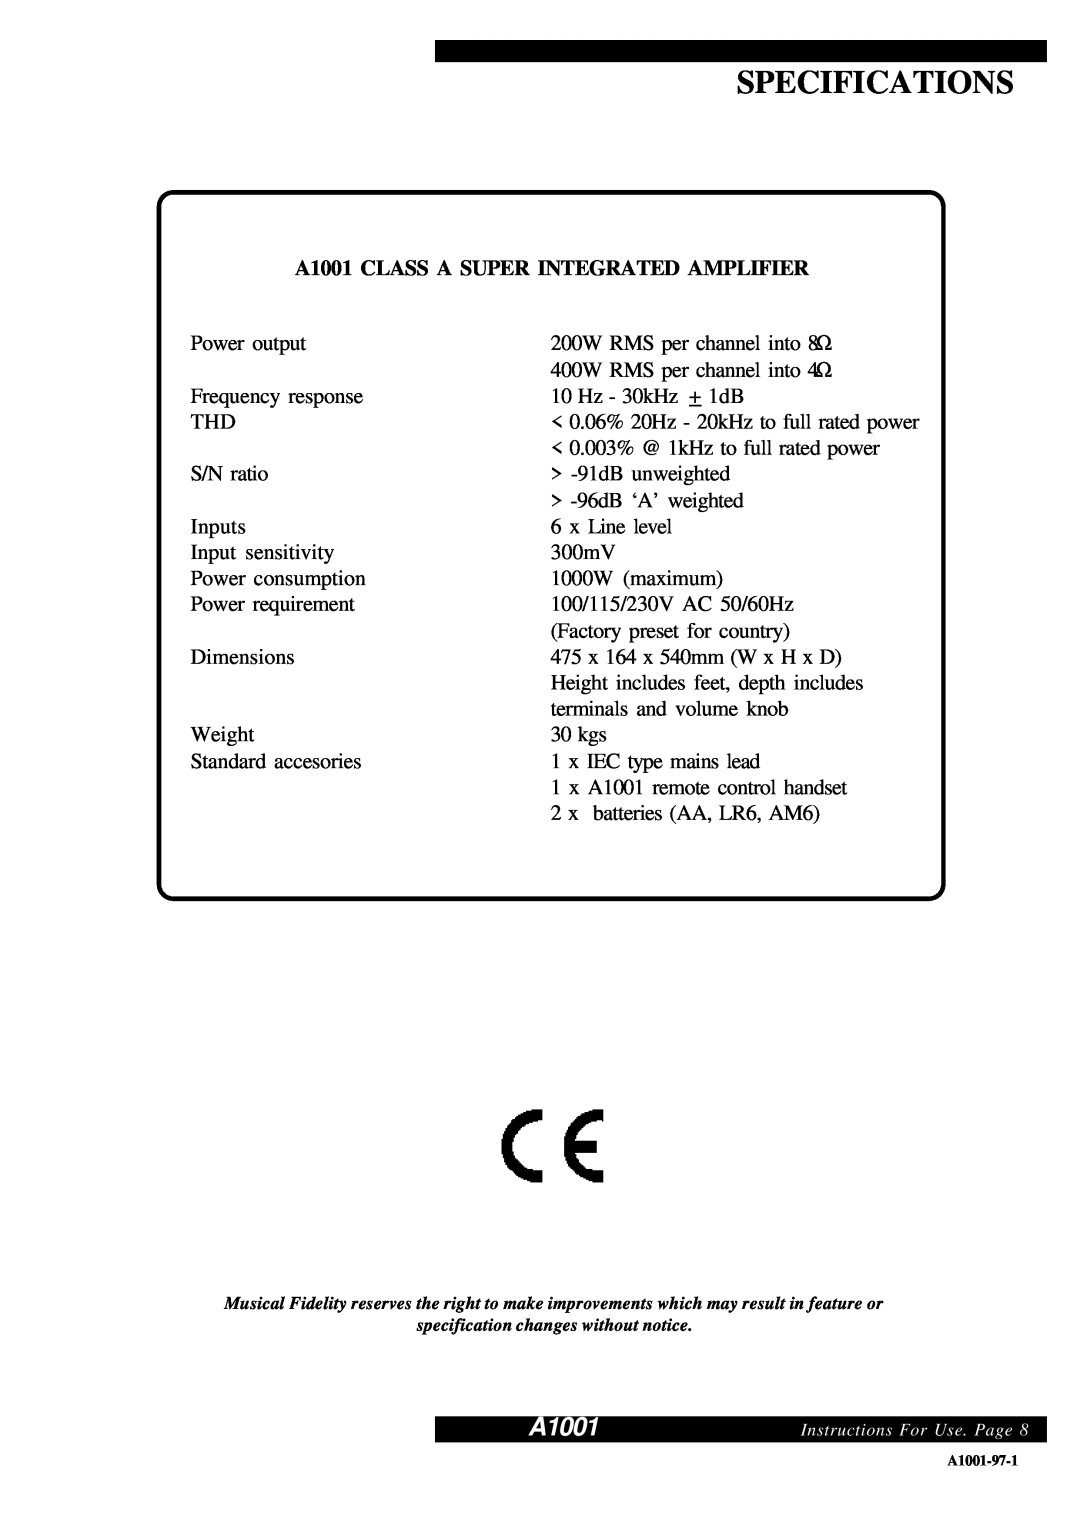 Musical Fidelity manual Specifications, A1001 CLASS A SUPER INTEGRATED AMPLIFIER 